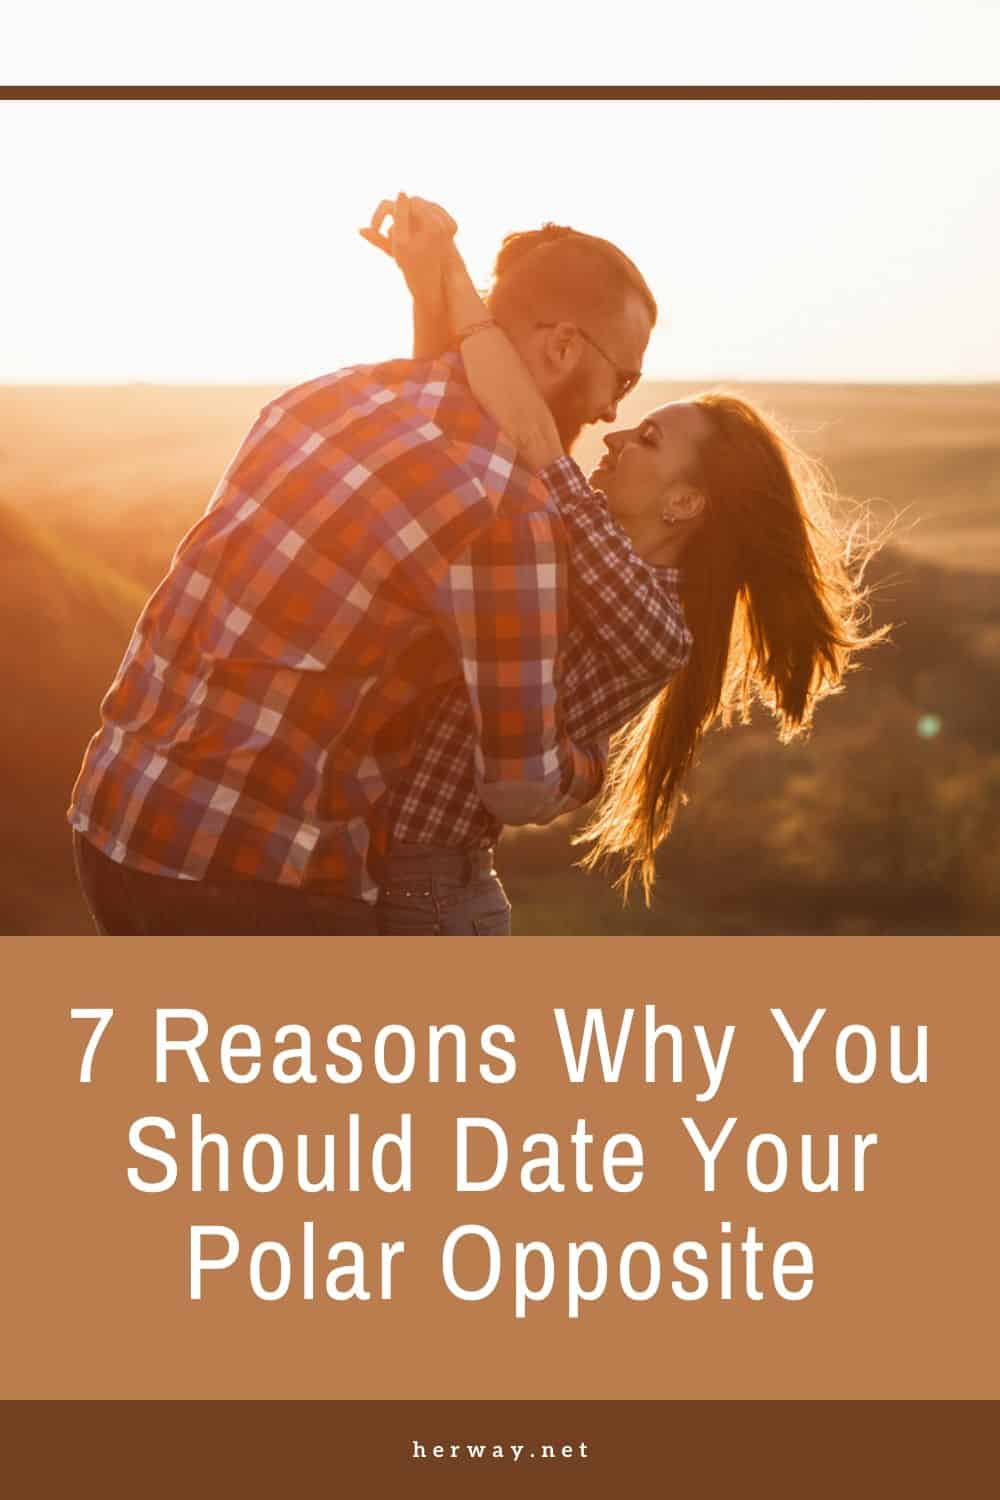 7 Reasons Why You Should Date Your Polar Opposite